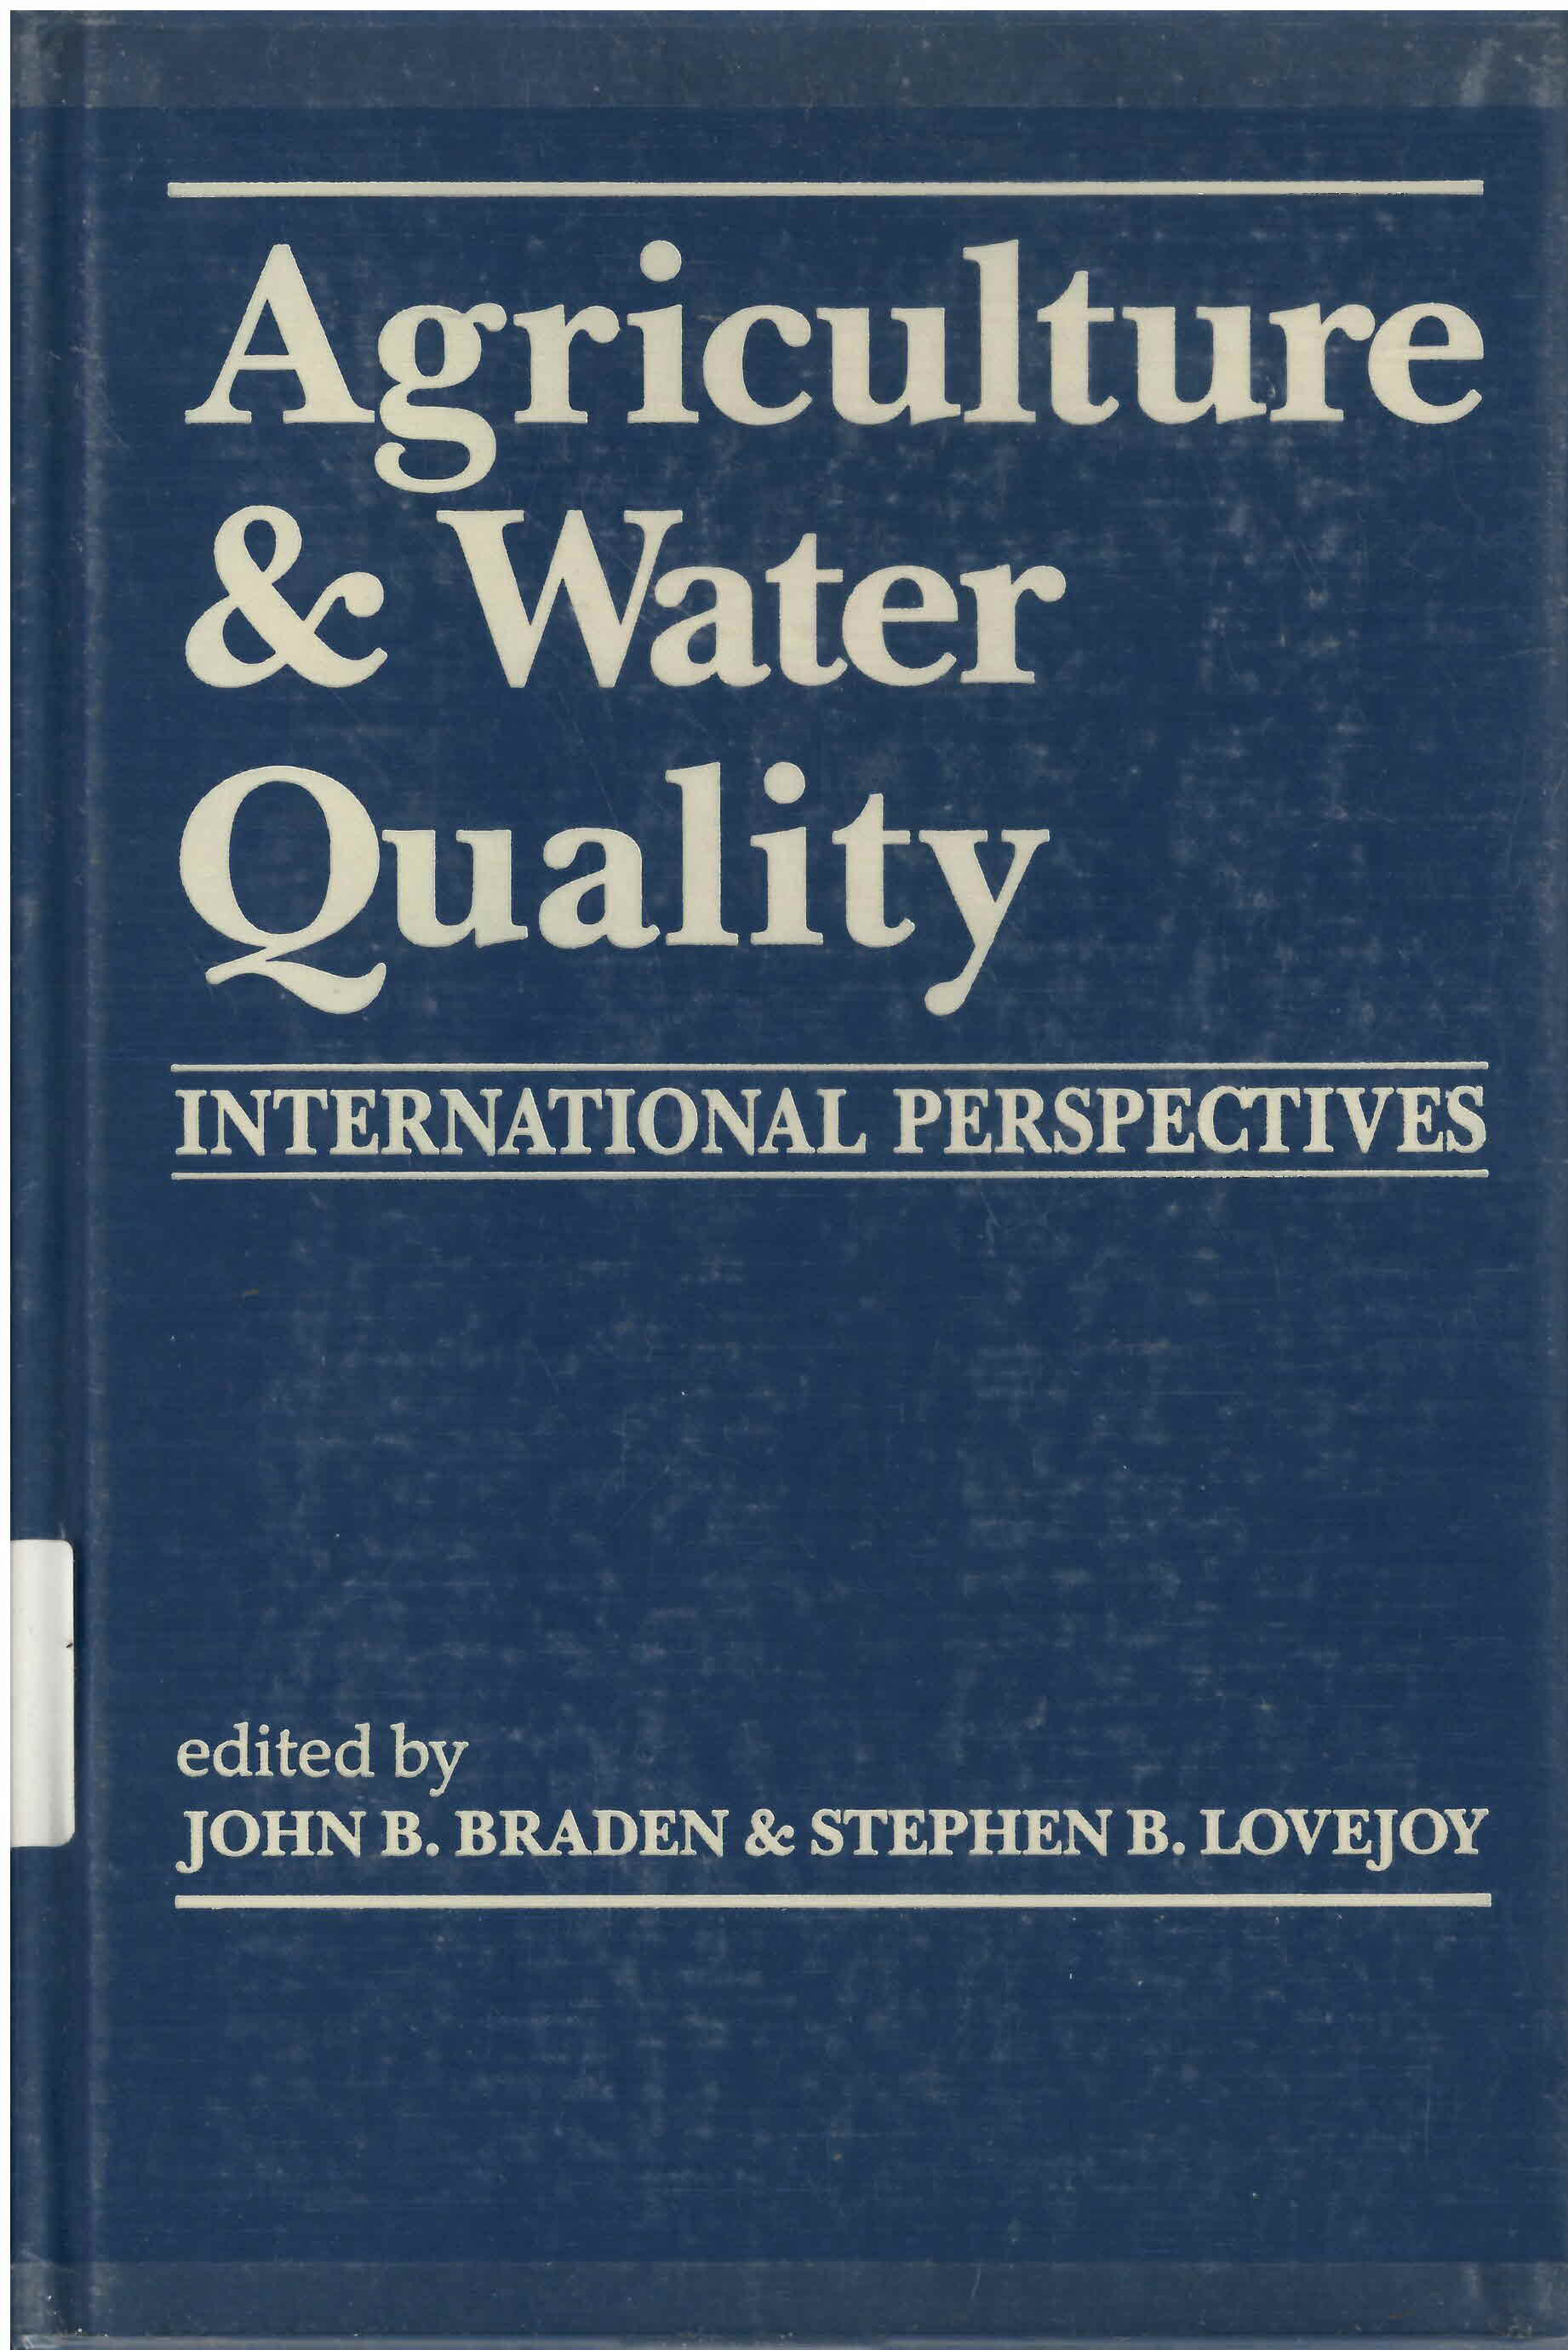 Agriculture and water quality : international perspectives